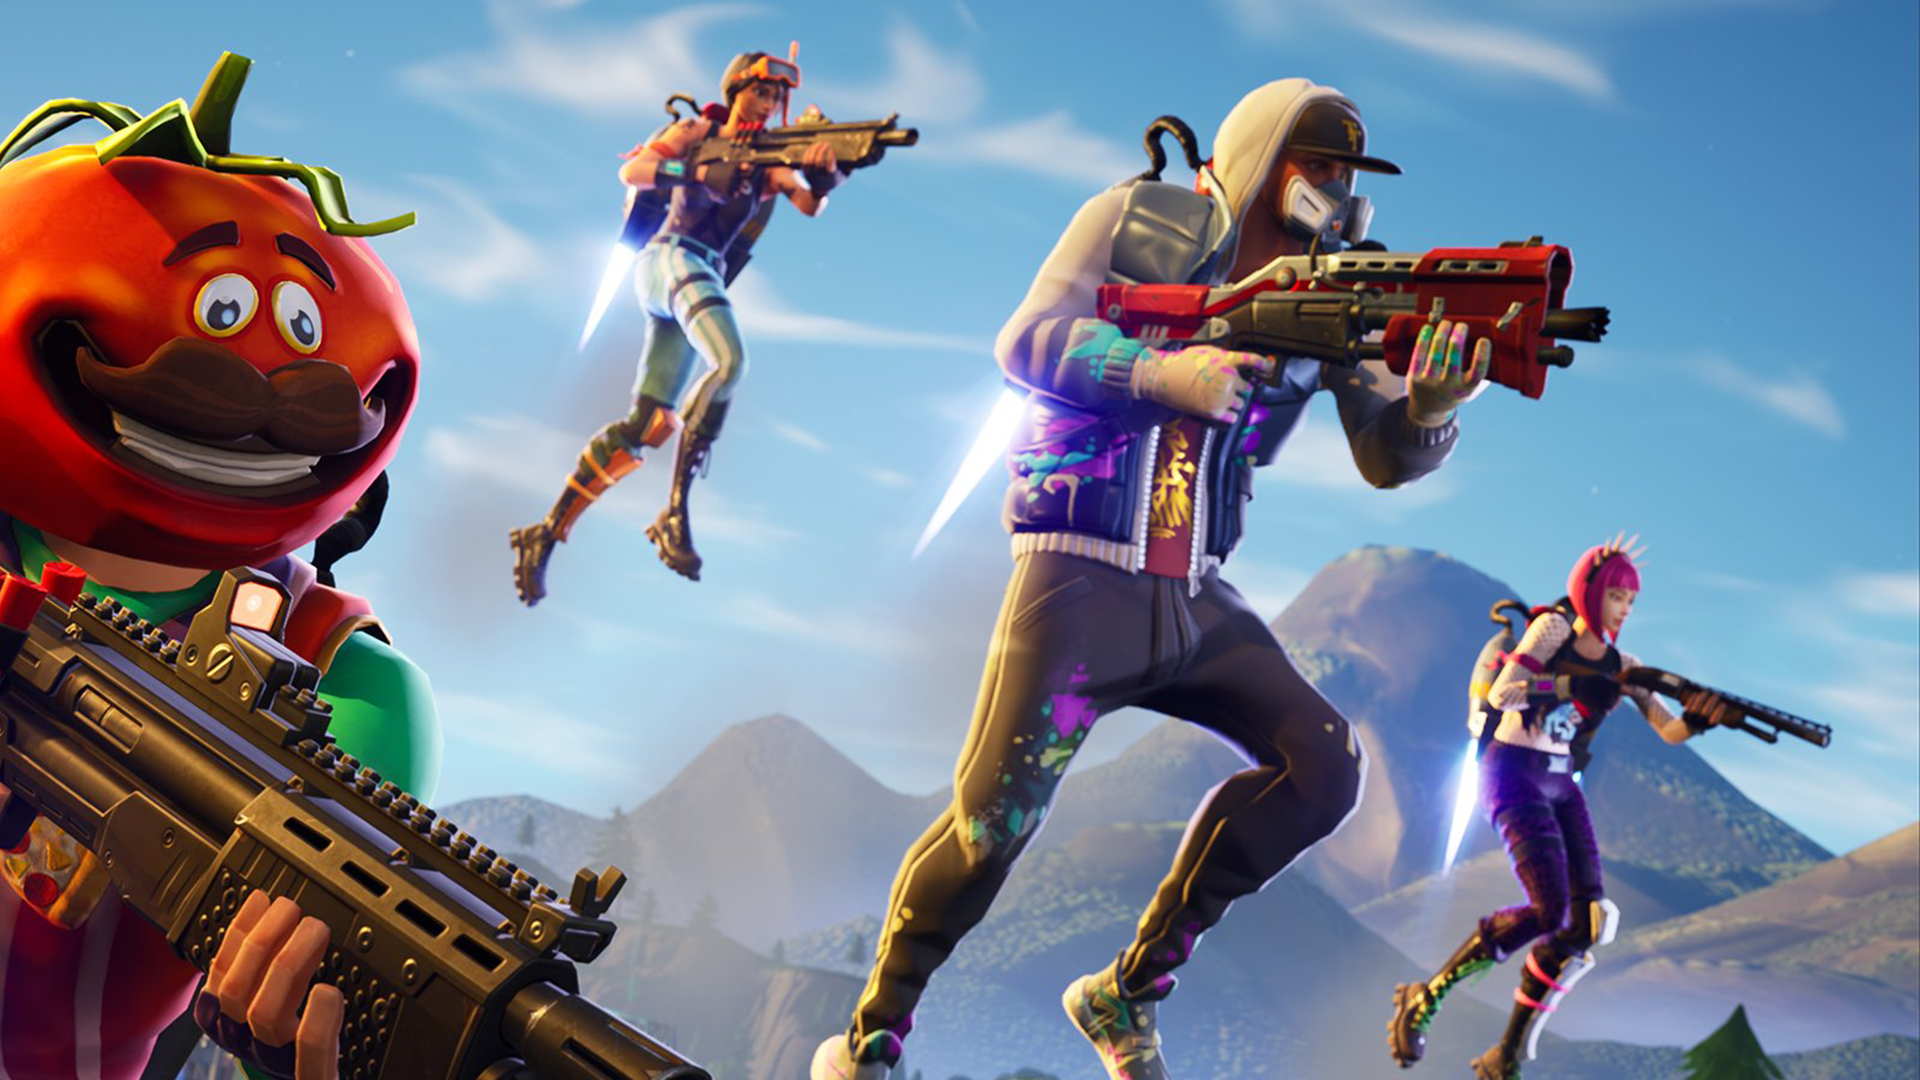 Today's Fortnite LTM on X: Close Encounters has been updated: - Jetpacks  on spawn is gone - Movement items are a focus - There's a ceiling storm,  meaning skybases are not possible